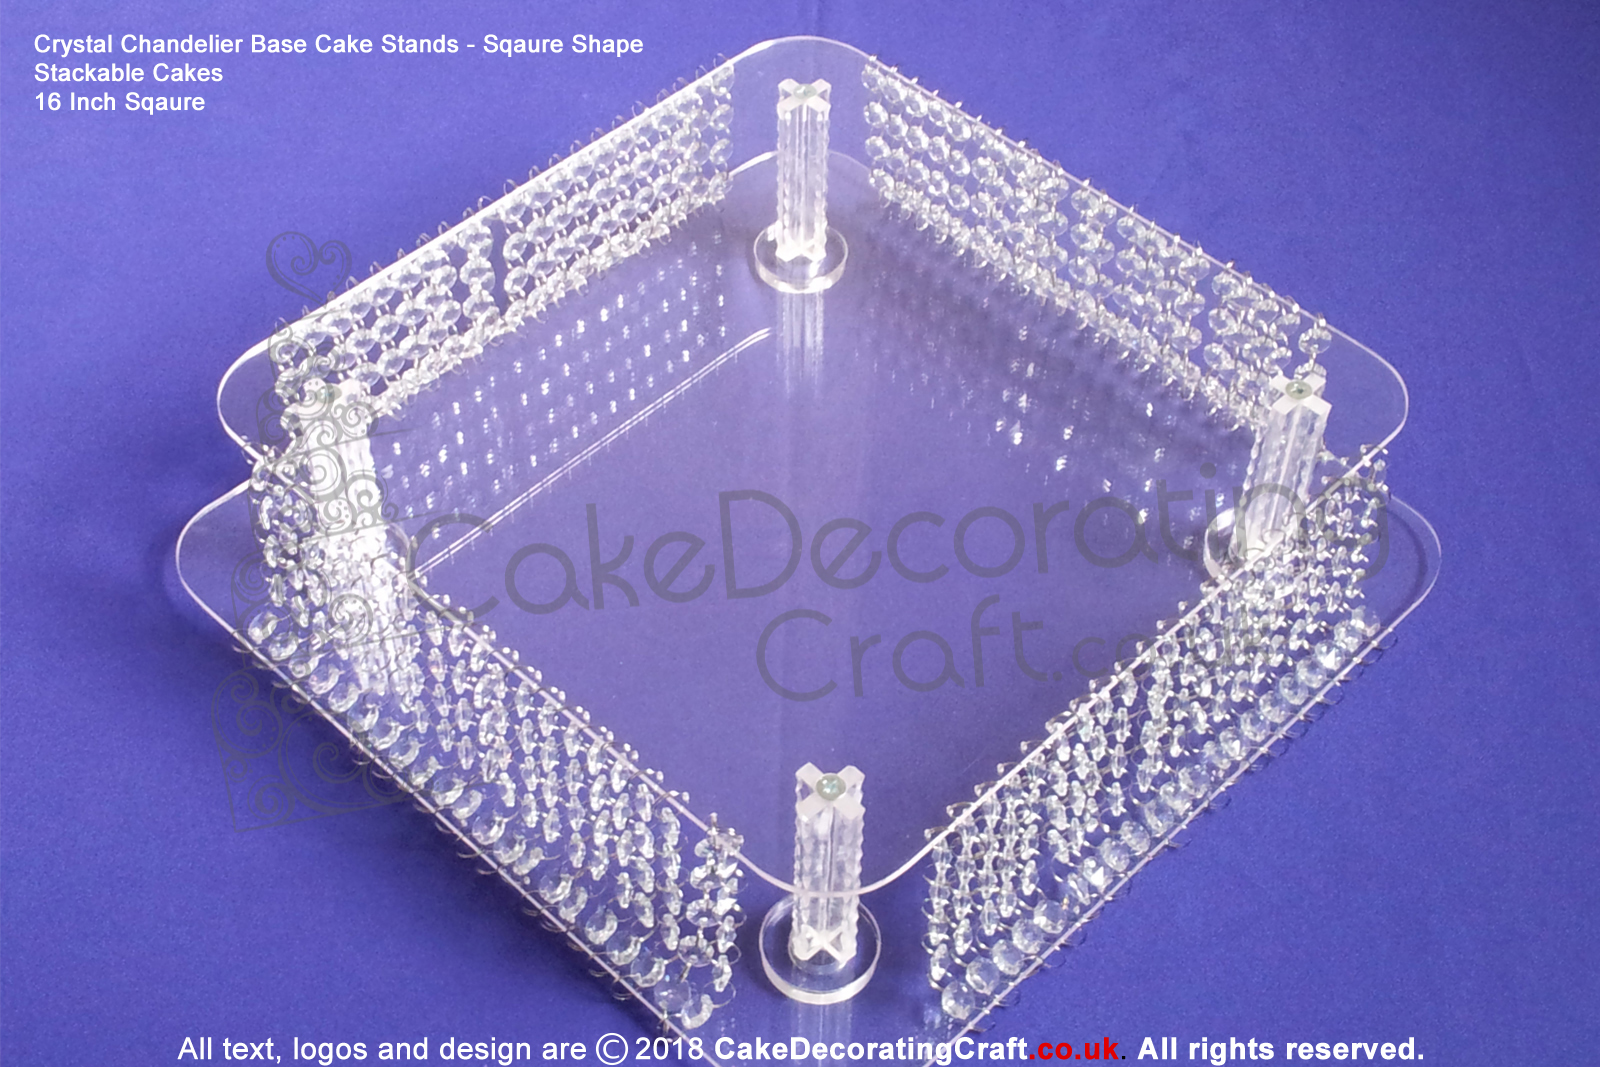 Chandelier Crystal Cake Base Stands | Stackable Wedding Cakes Display | 16.5" Sqaure Plate 10 cm Height | Single Base Stand | Real Glass Diamond Crystals